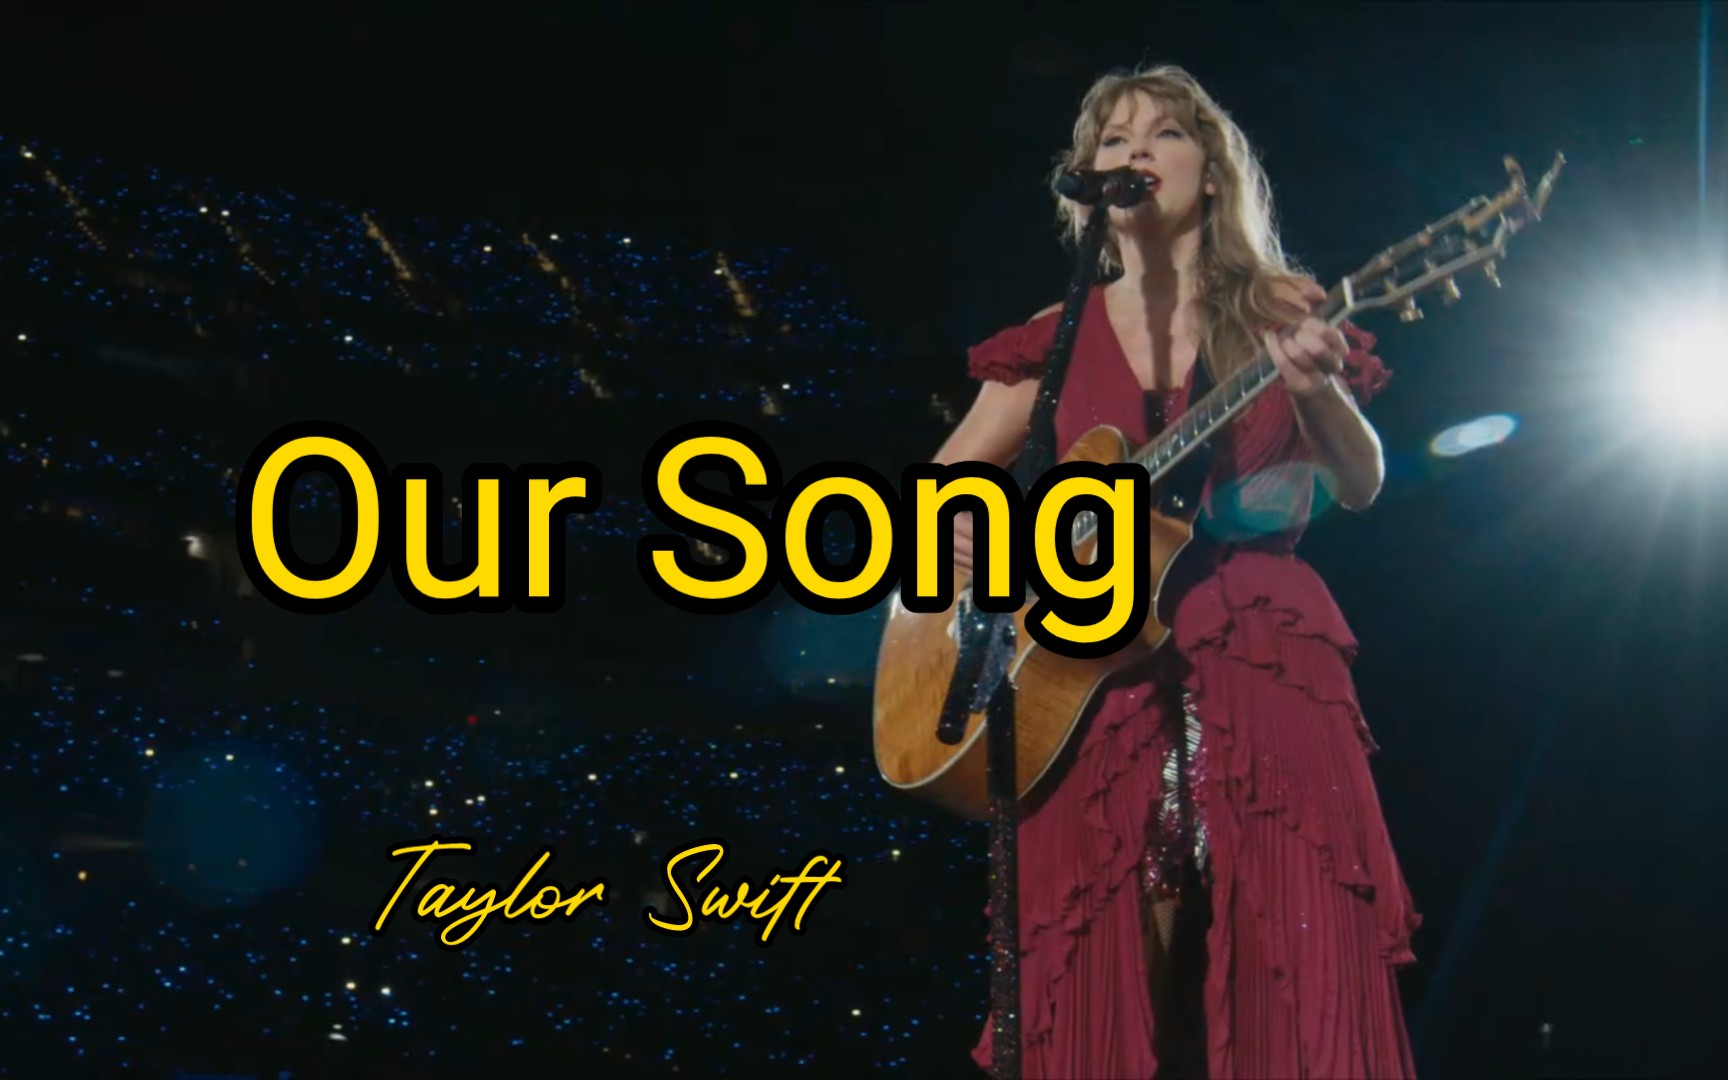 Our Song 跟唱教学笔记/学唱英文歌 Taylor Swift